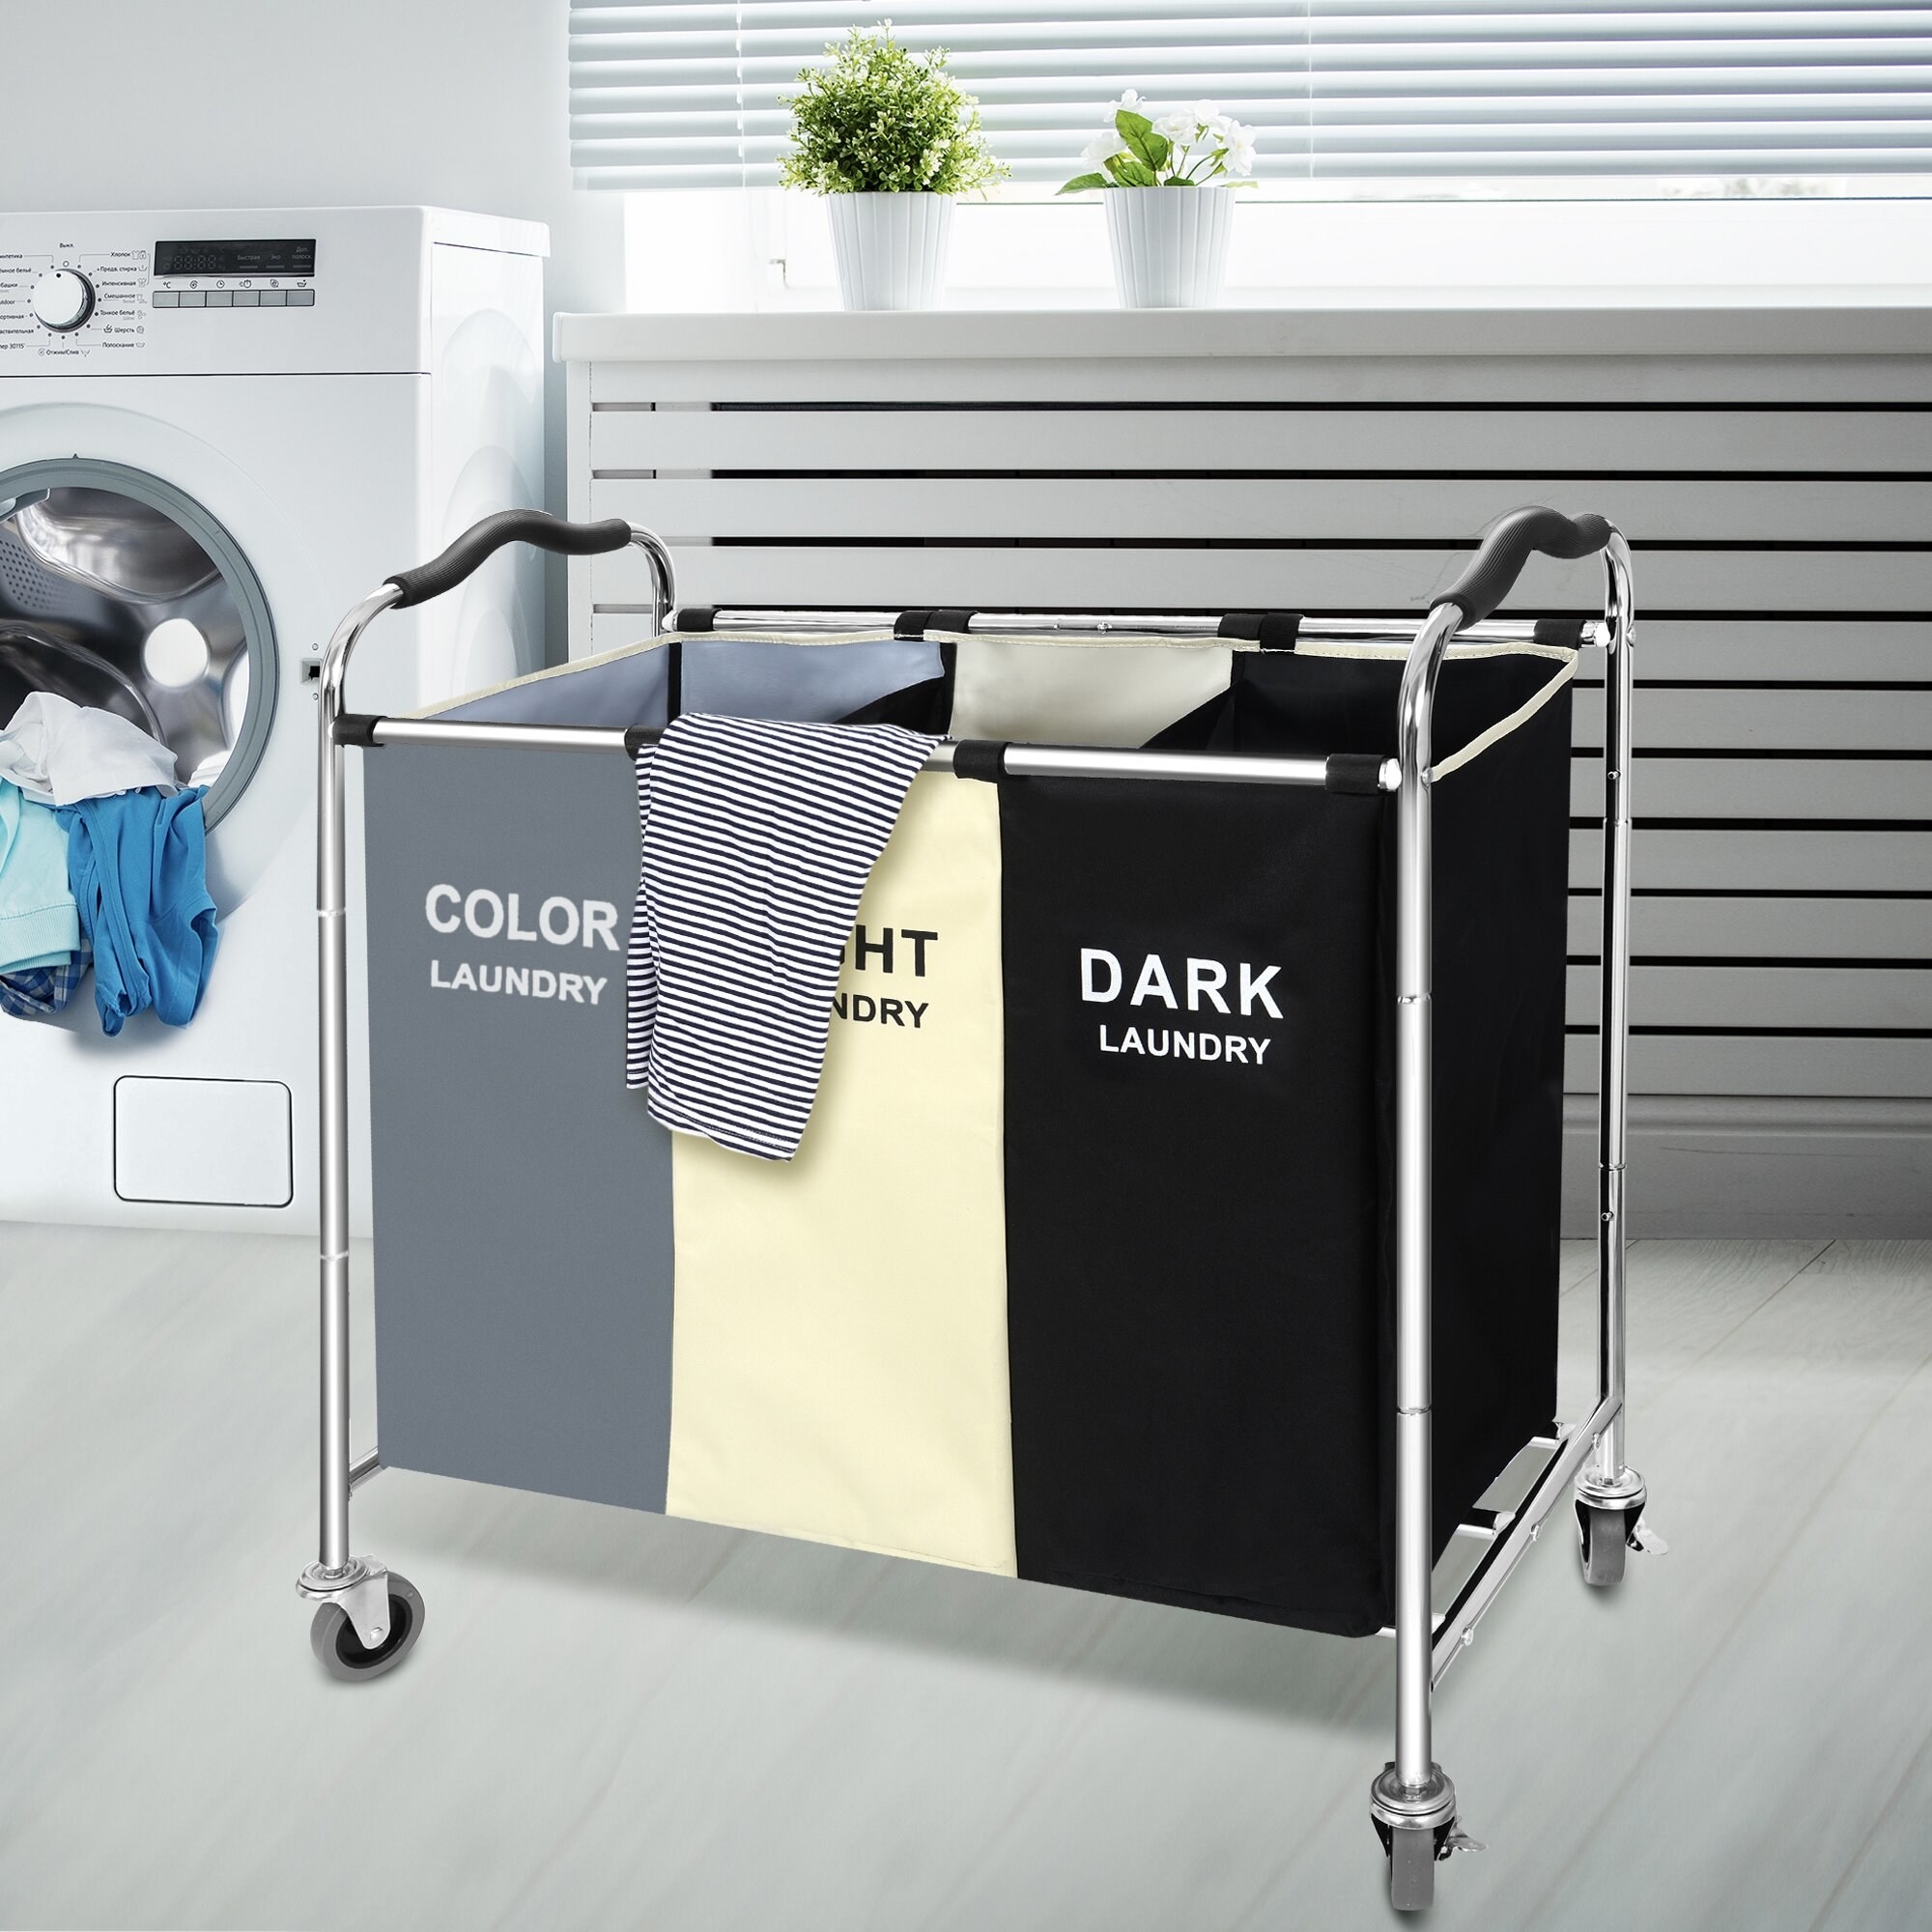 Three bag hamper in laundry room with color, light and dark